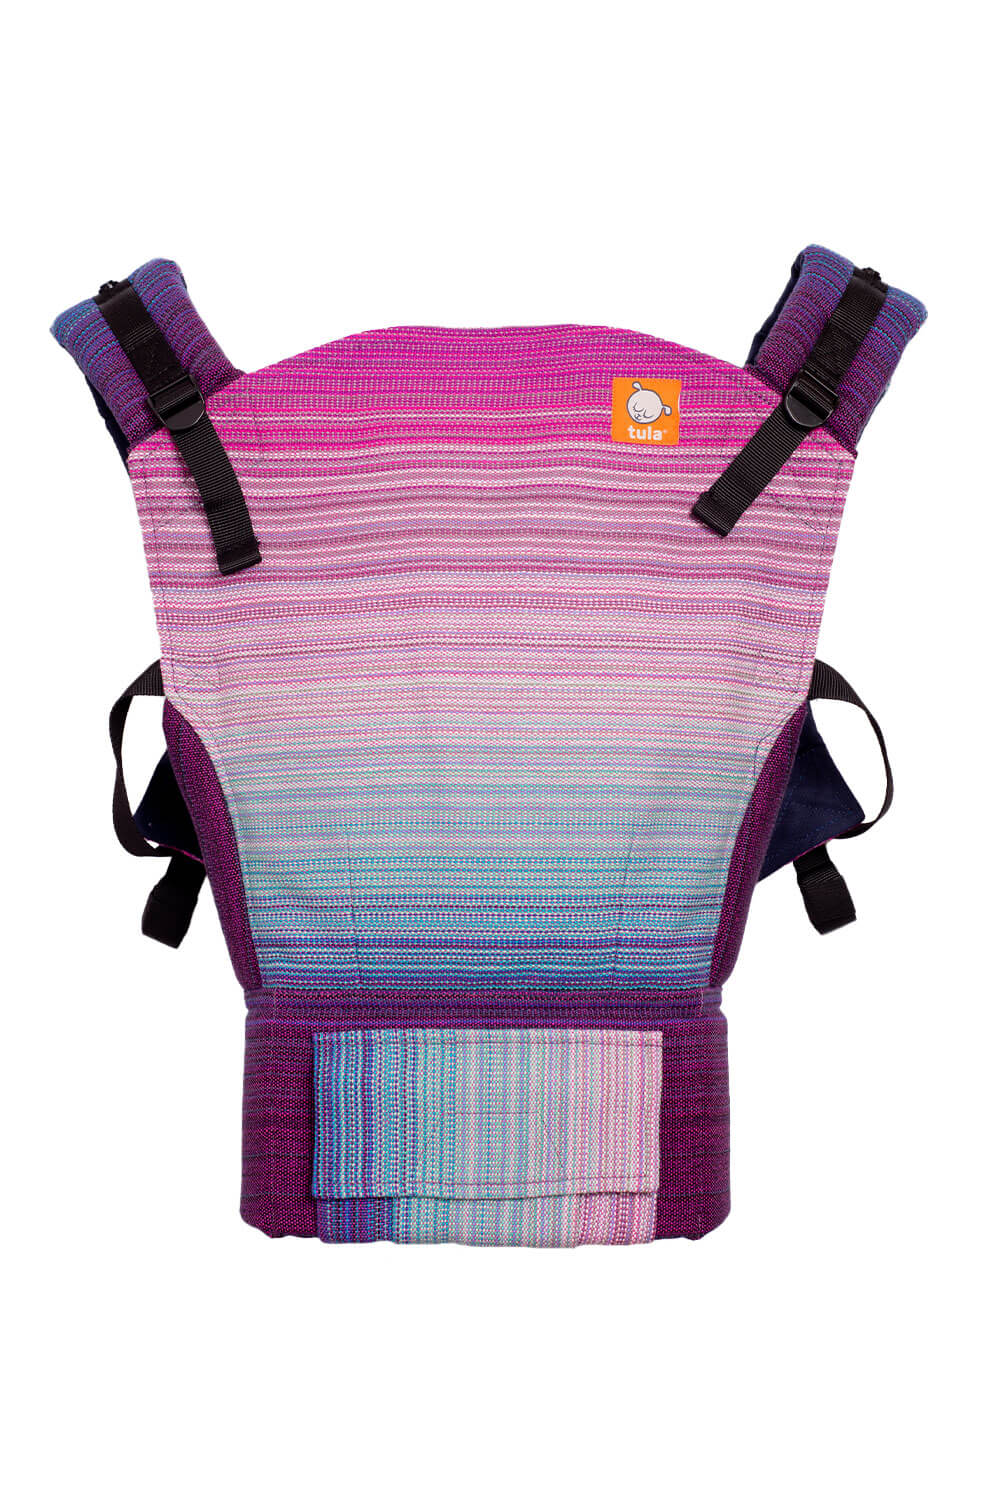 Eagerly Anticipated - Signature Handwoven Standard Baby Carrier